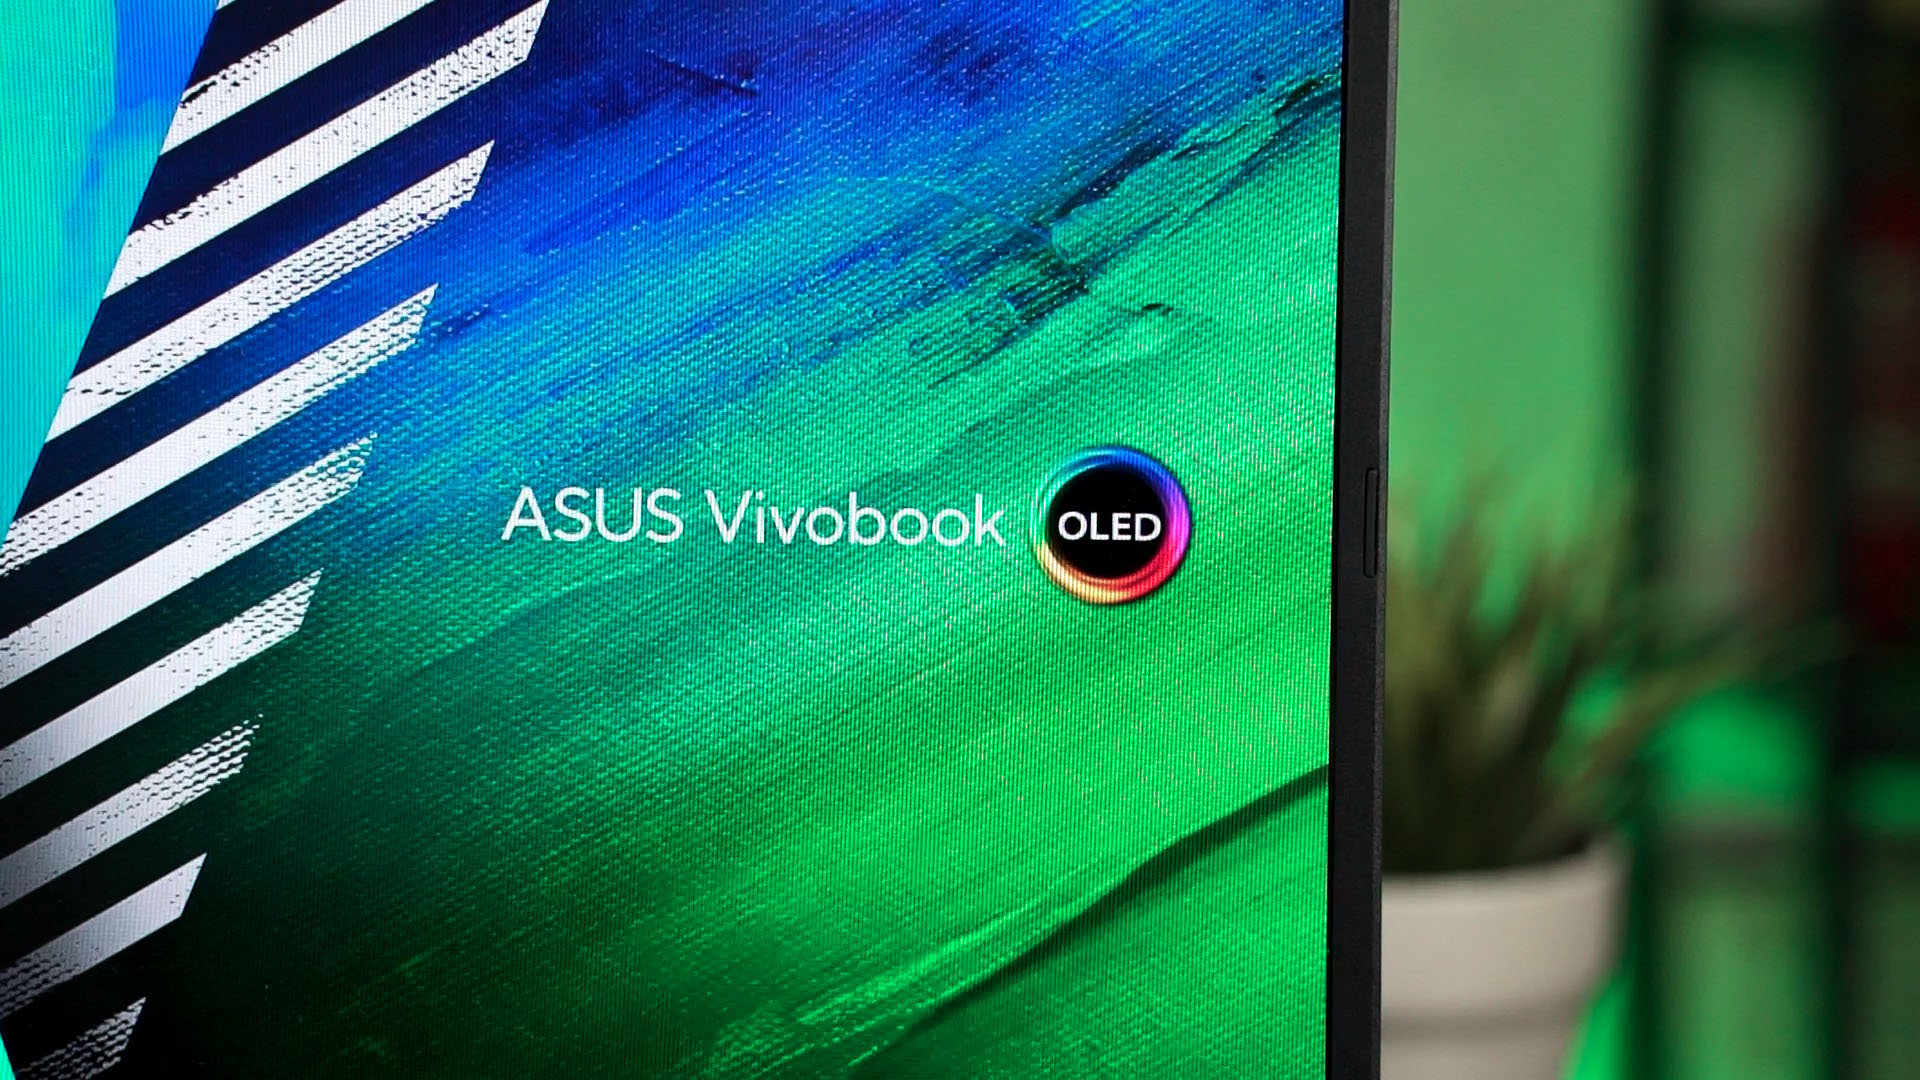 Portable OLED gaming is now possible with the ASUS Vivobook Pro 15 OLED